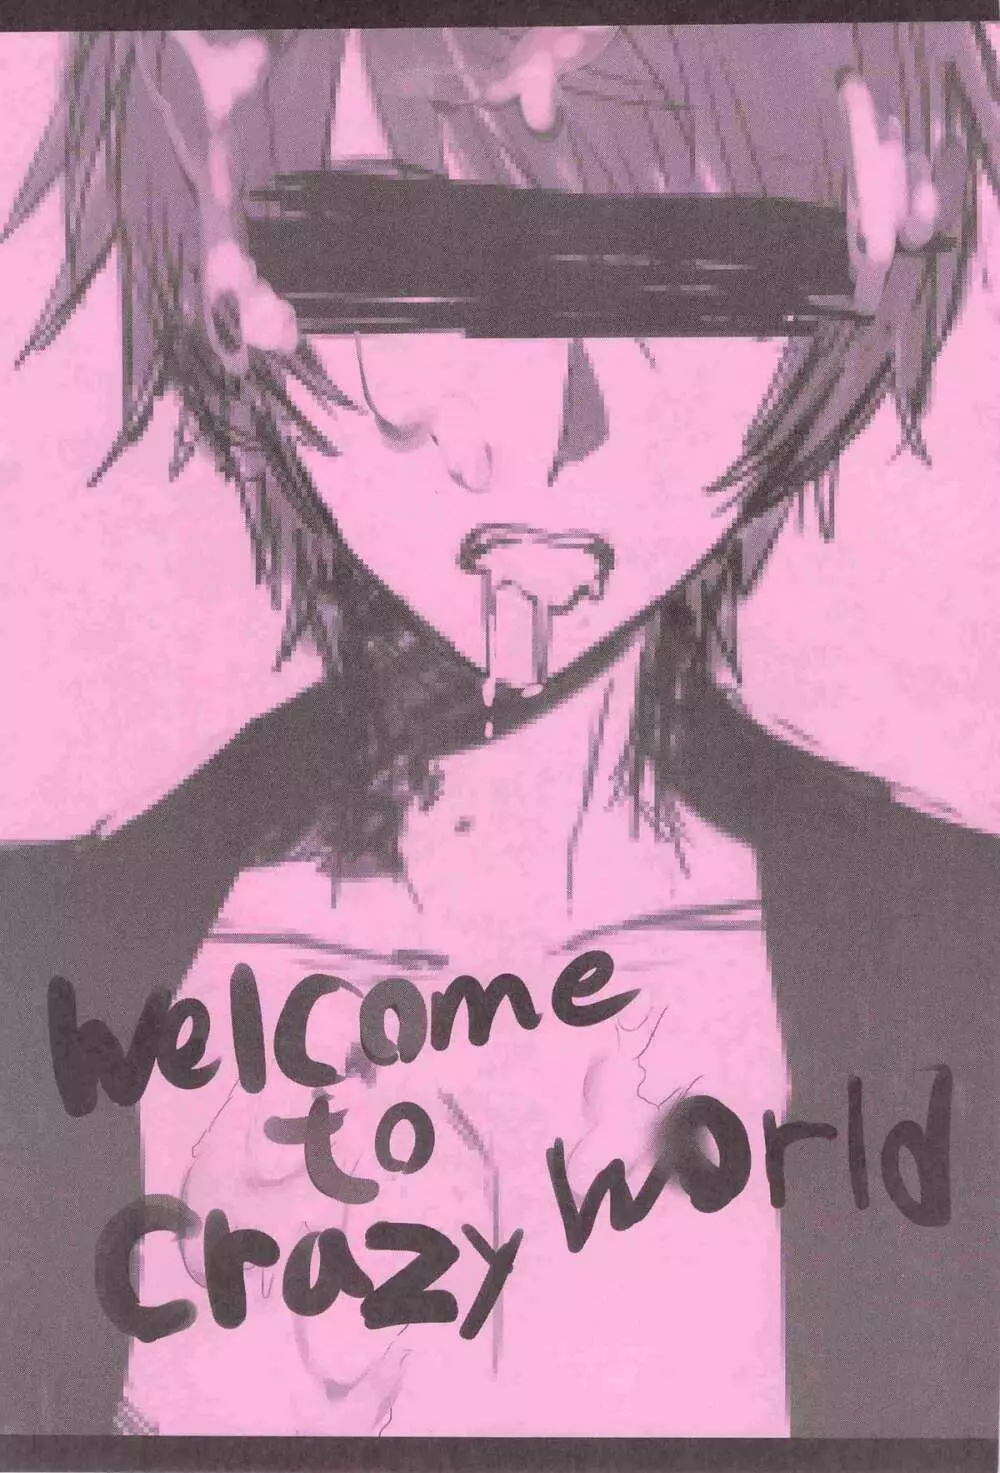 WELCOME TO CRAZY WORLD Page.2